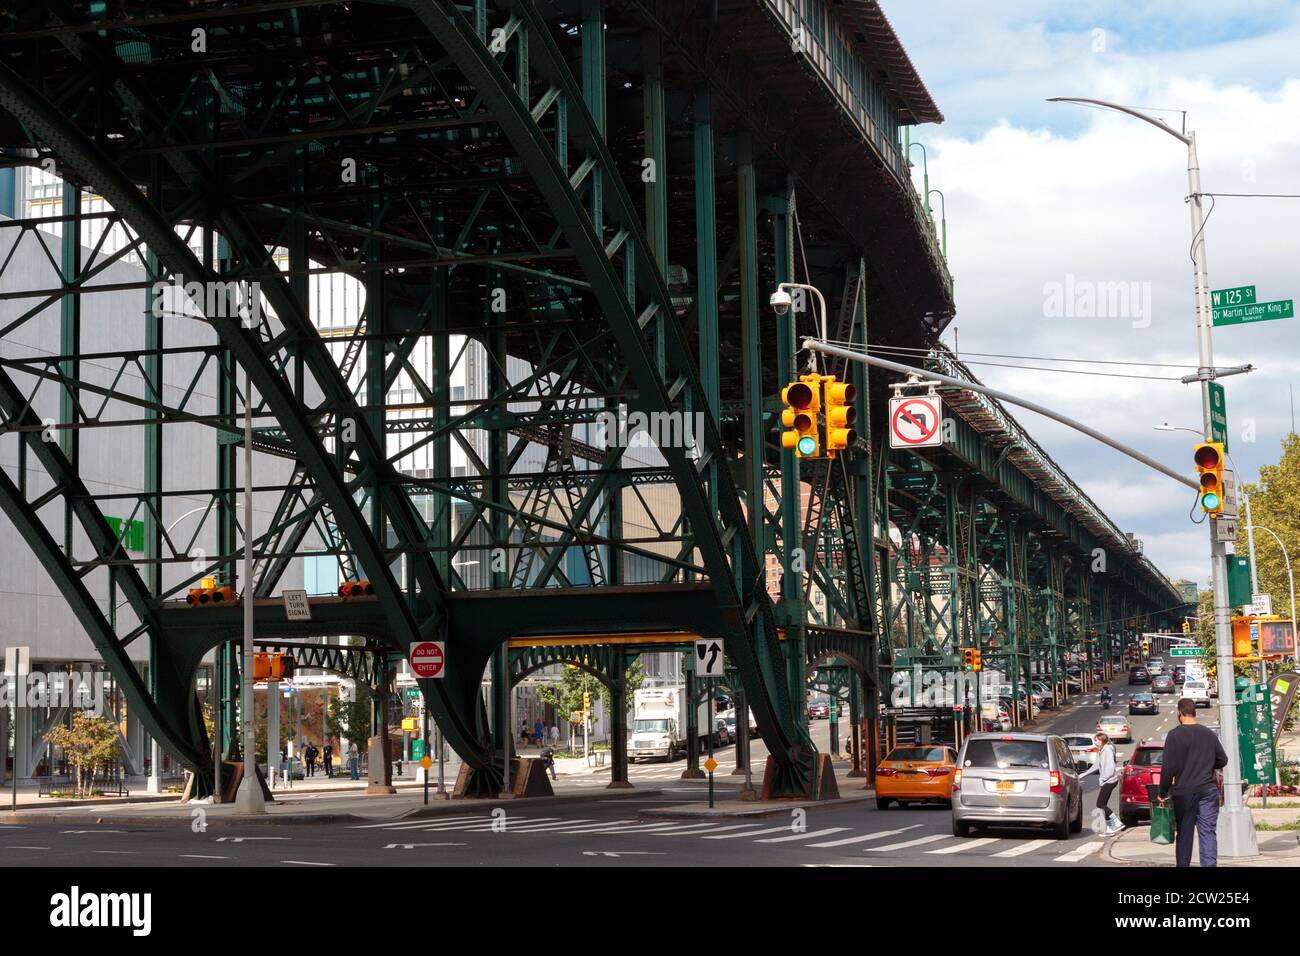 Street scene under the elevated subway station tracks at w 125th street and Broadway in Harlem Stock Photo